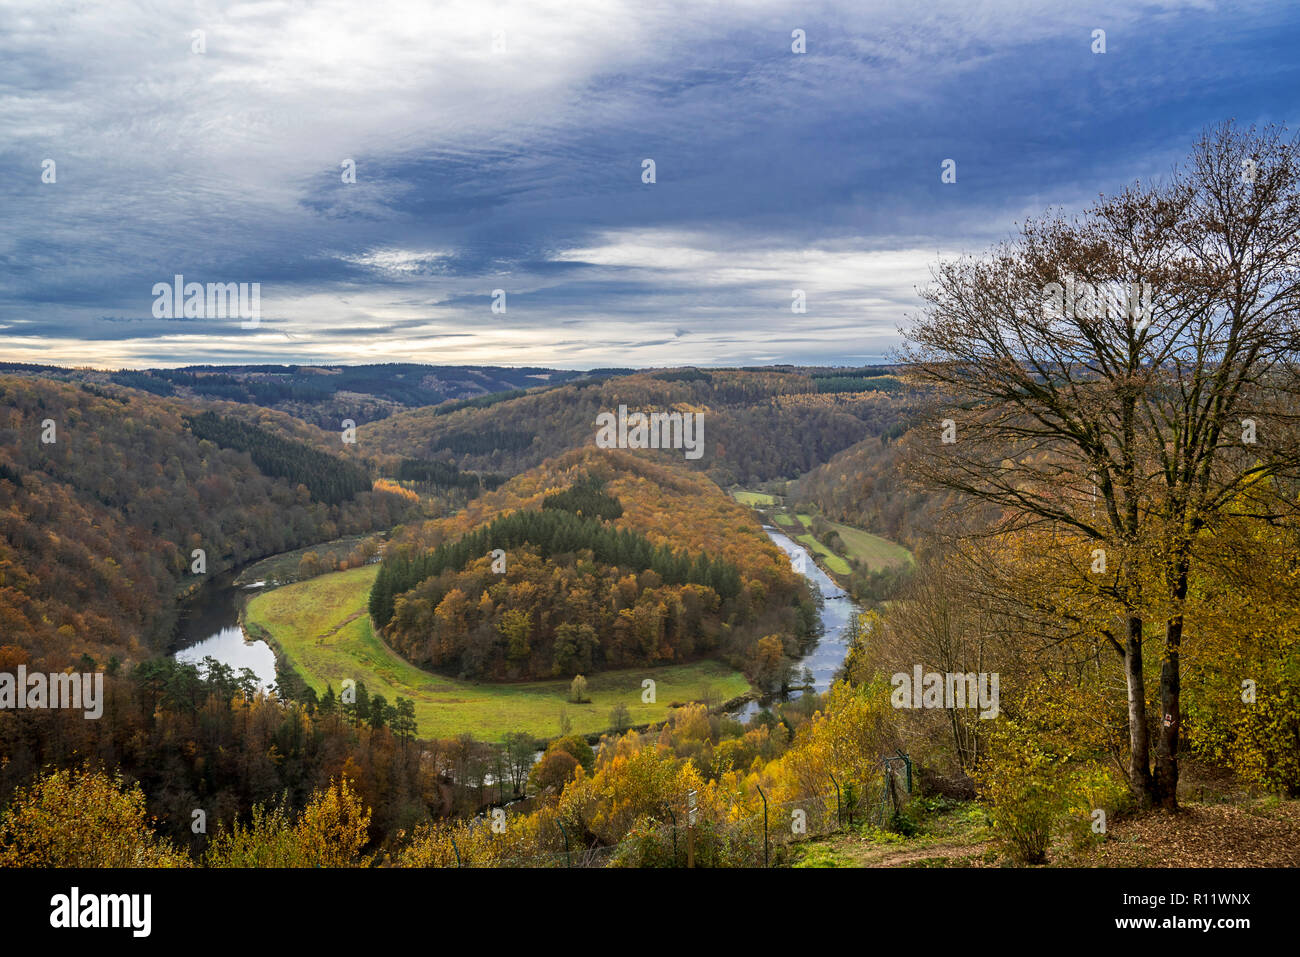 Tombeau du Géant in autumn, wooded hill inside meander of the river Semois at Botassart, Belgian Ardennes, Luxembourg, Wallonia, Belgium Stock Photo